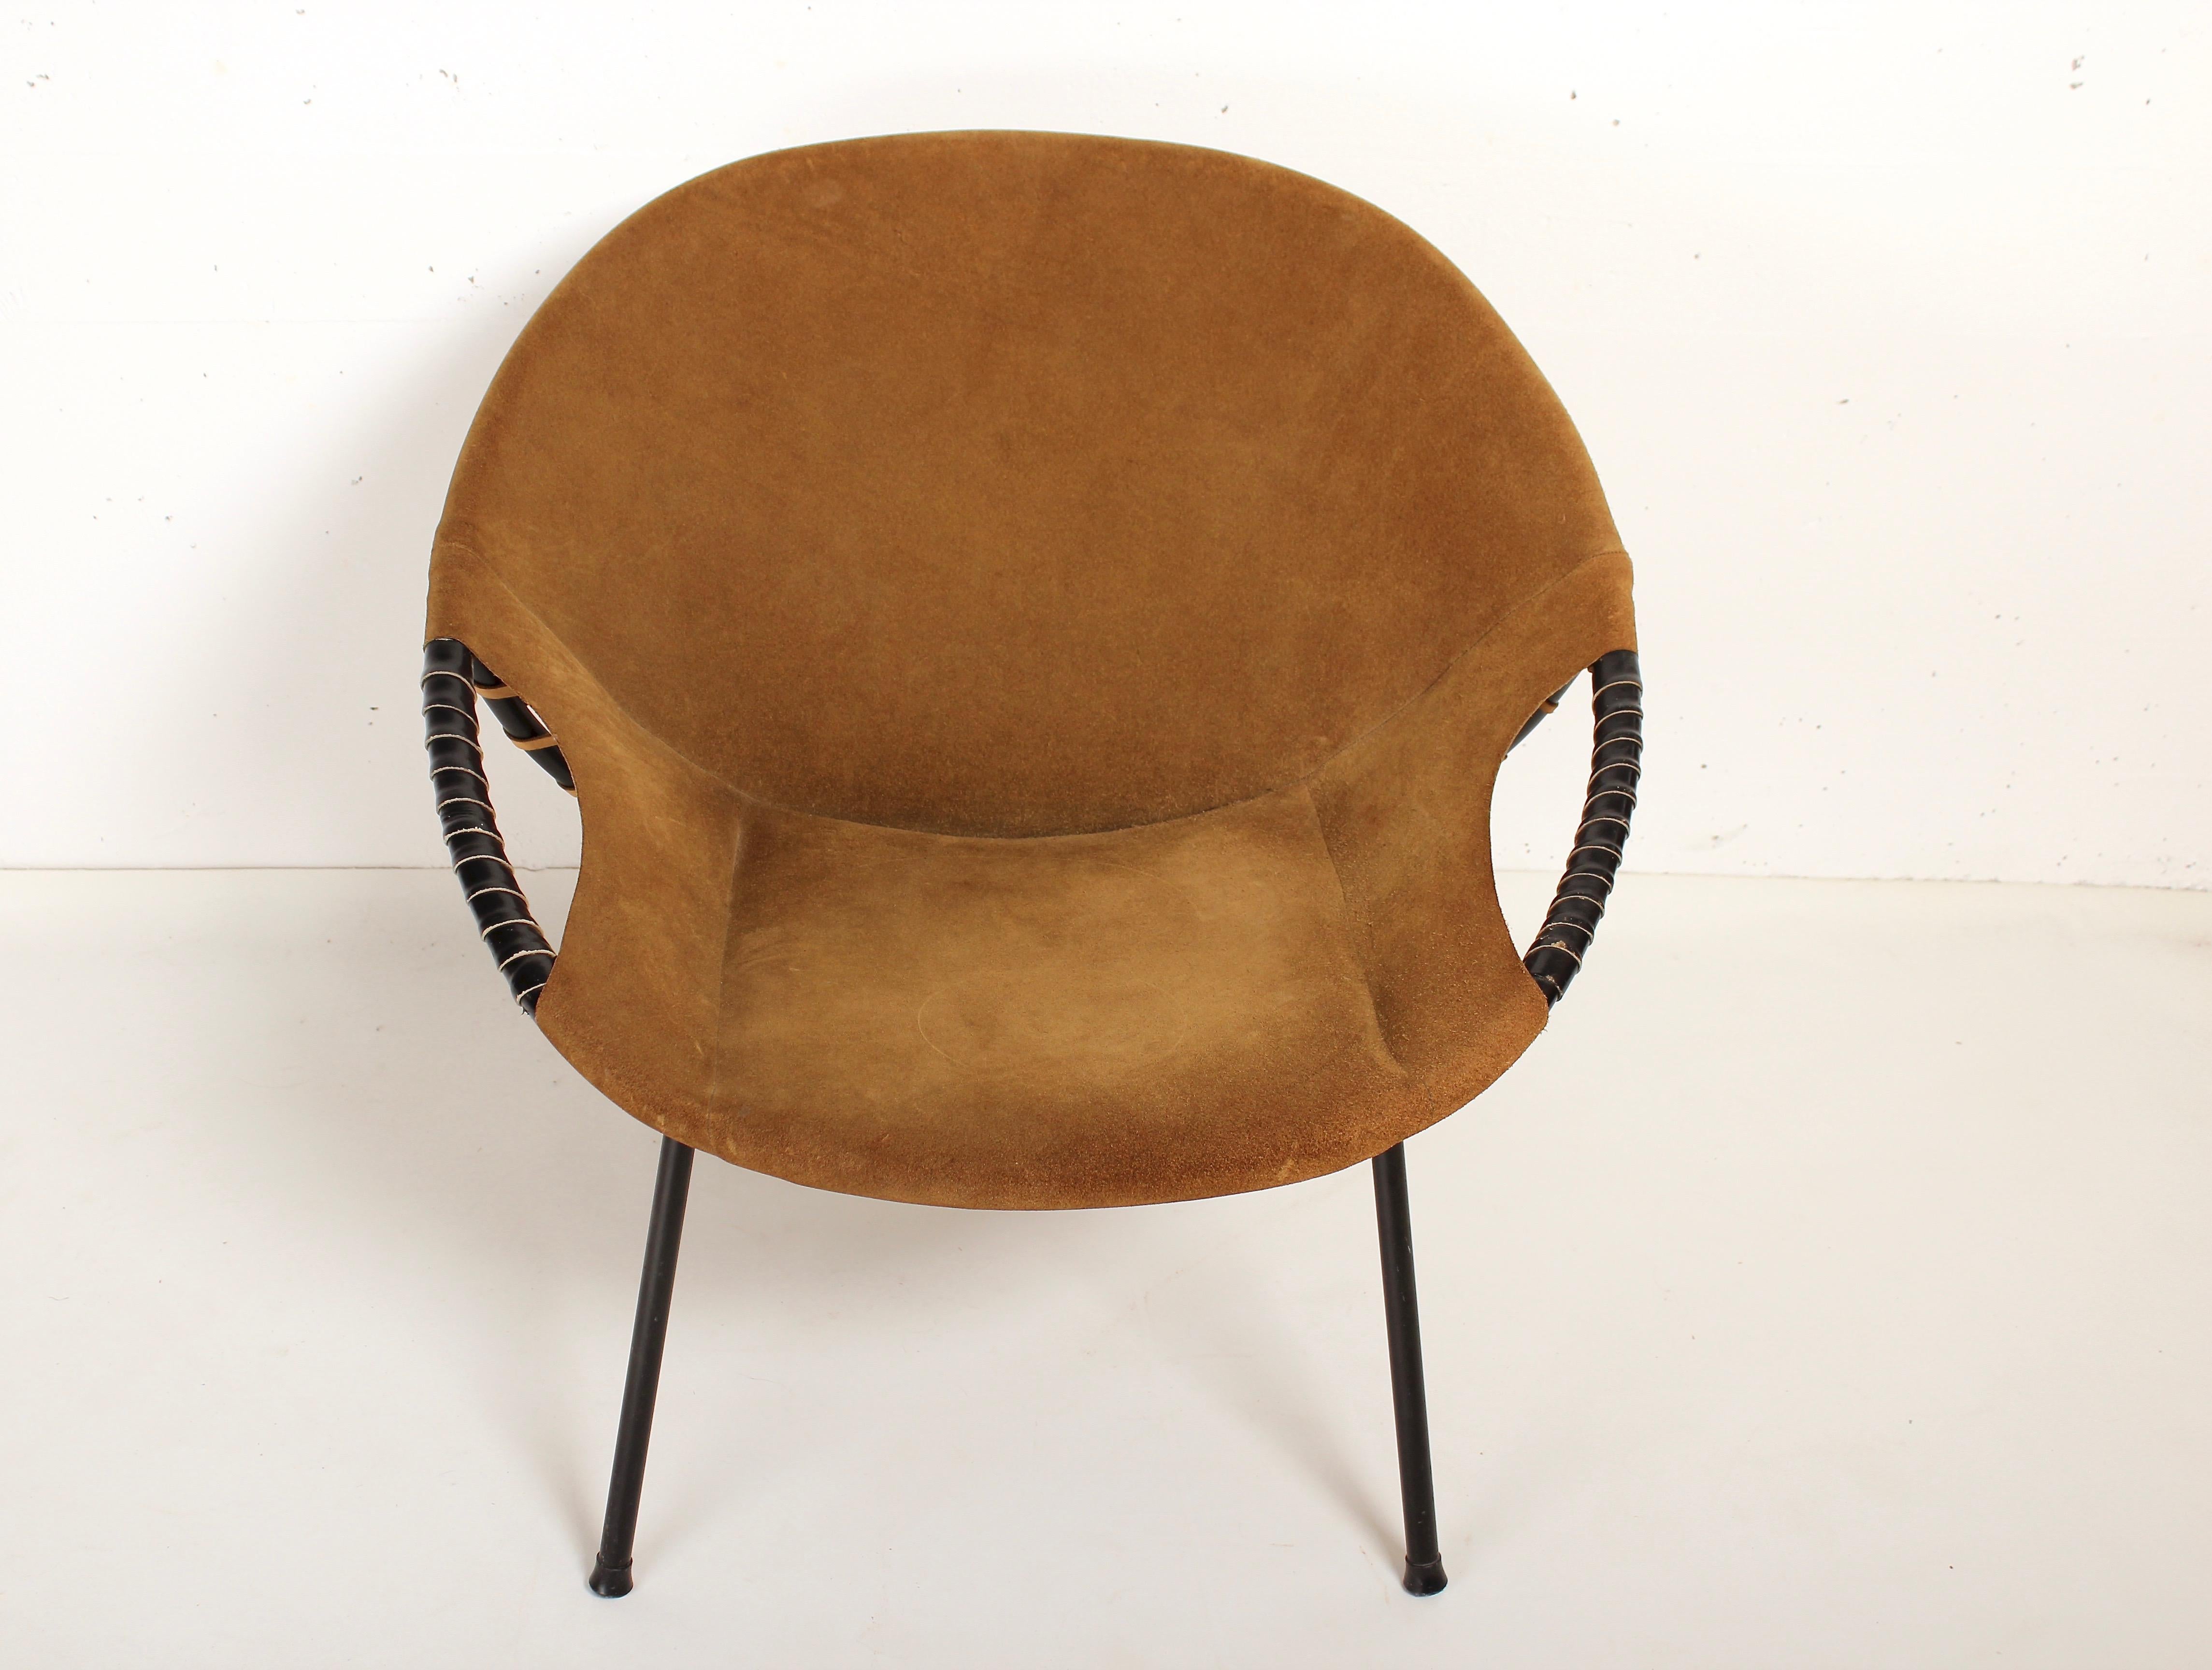 This beautiful circle lounge chairs was designed by Lusch Erzeugnis for Lusch & Co in the 1960s. Tubular enameled metal laced sling/scoop arm chair, in Army green suede leather, all original.
The chair is very comfortable and timeless.